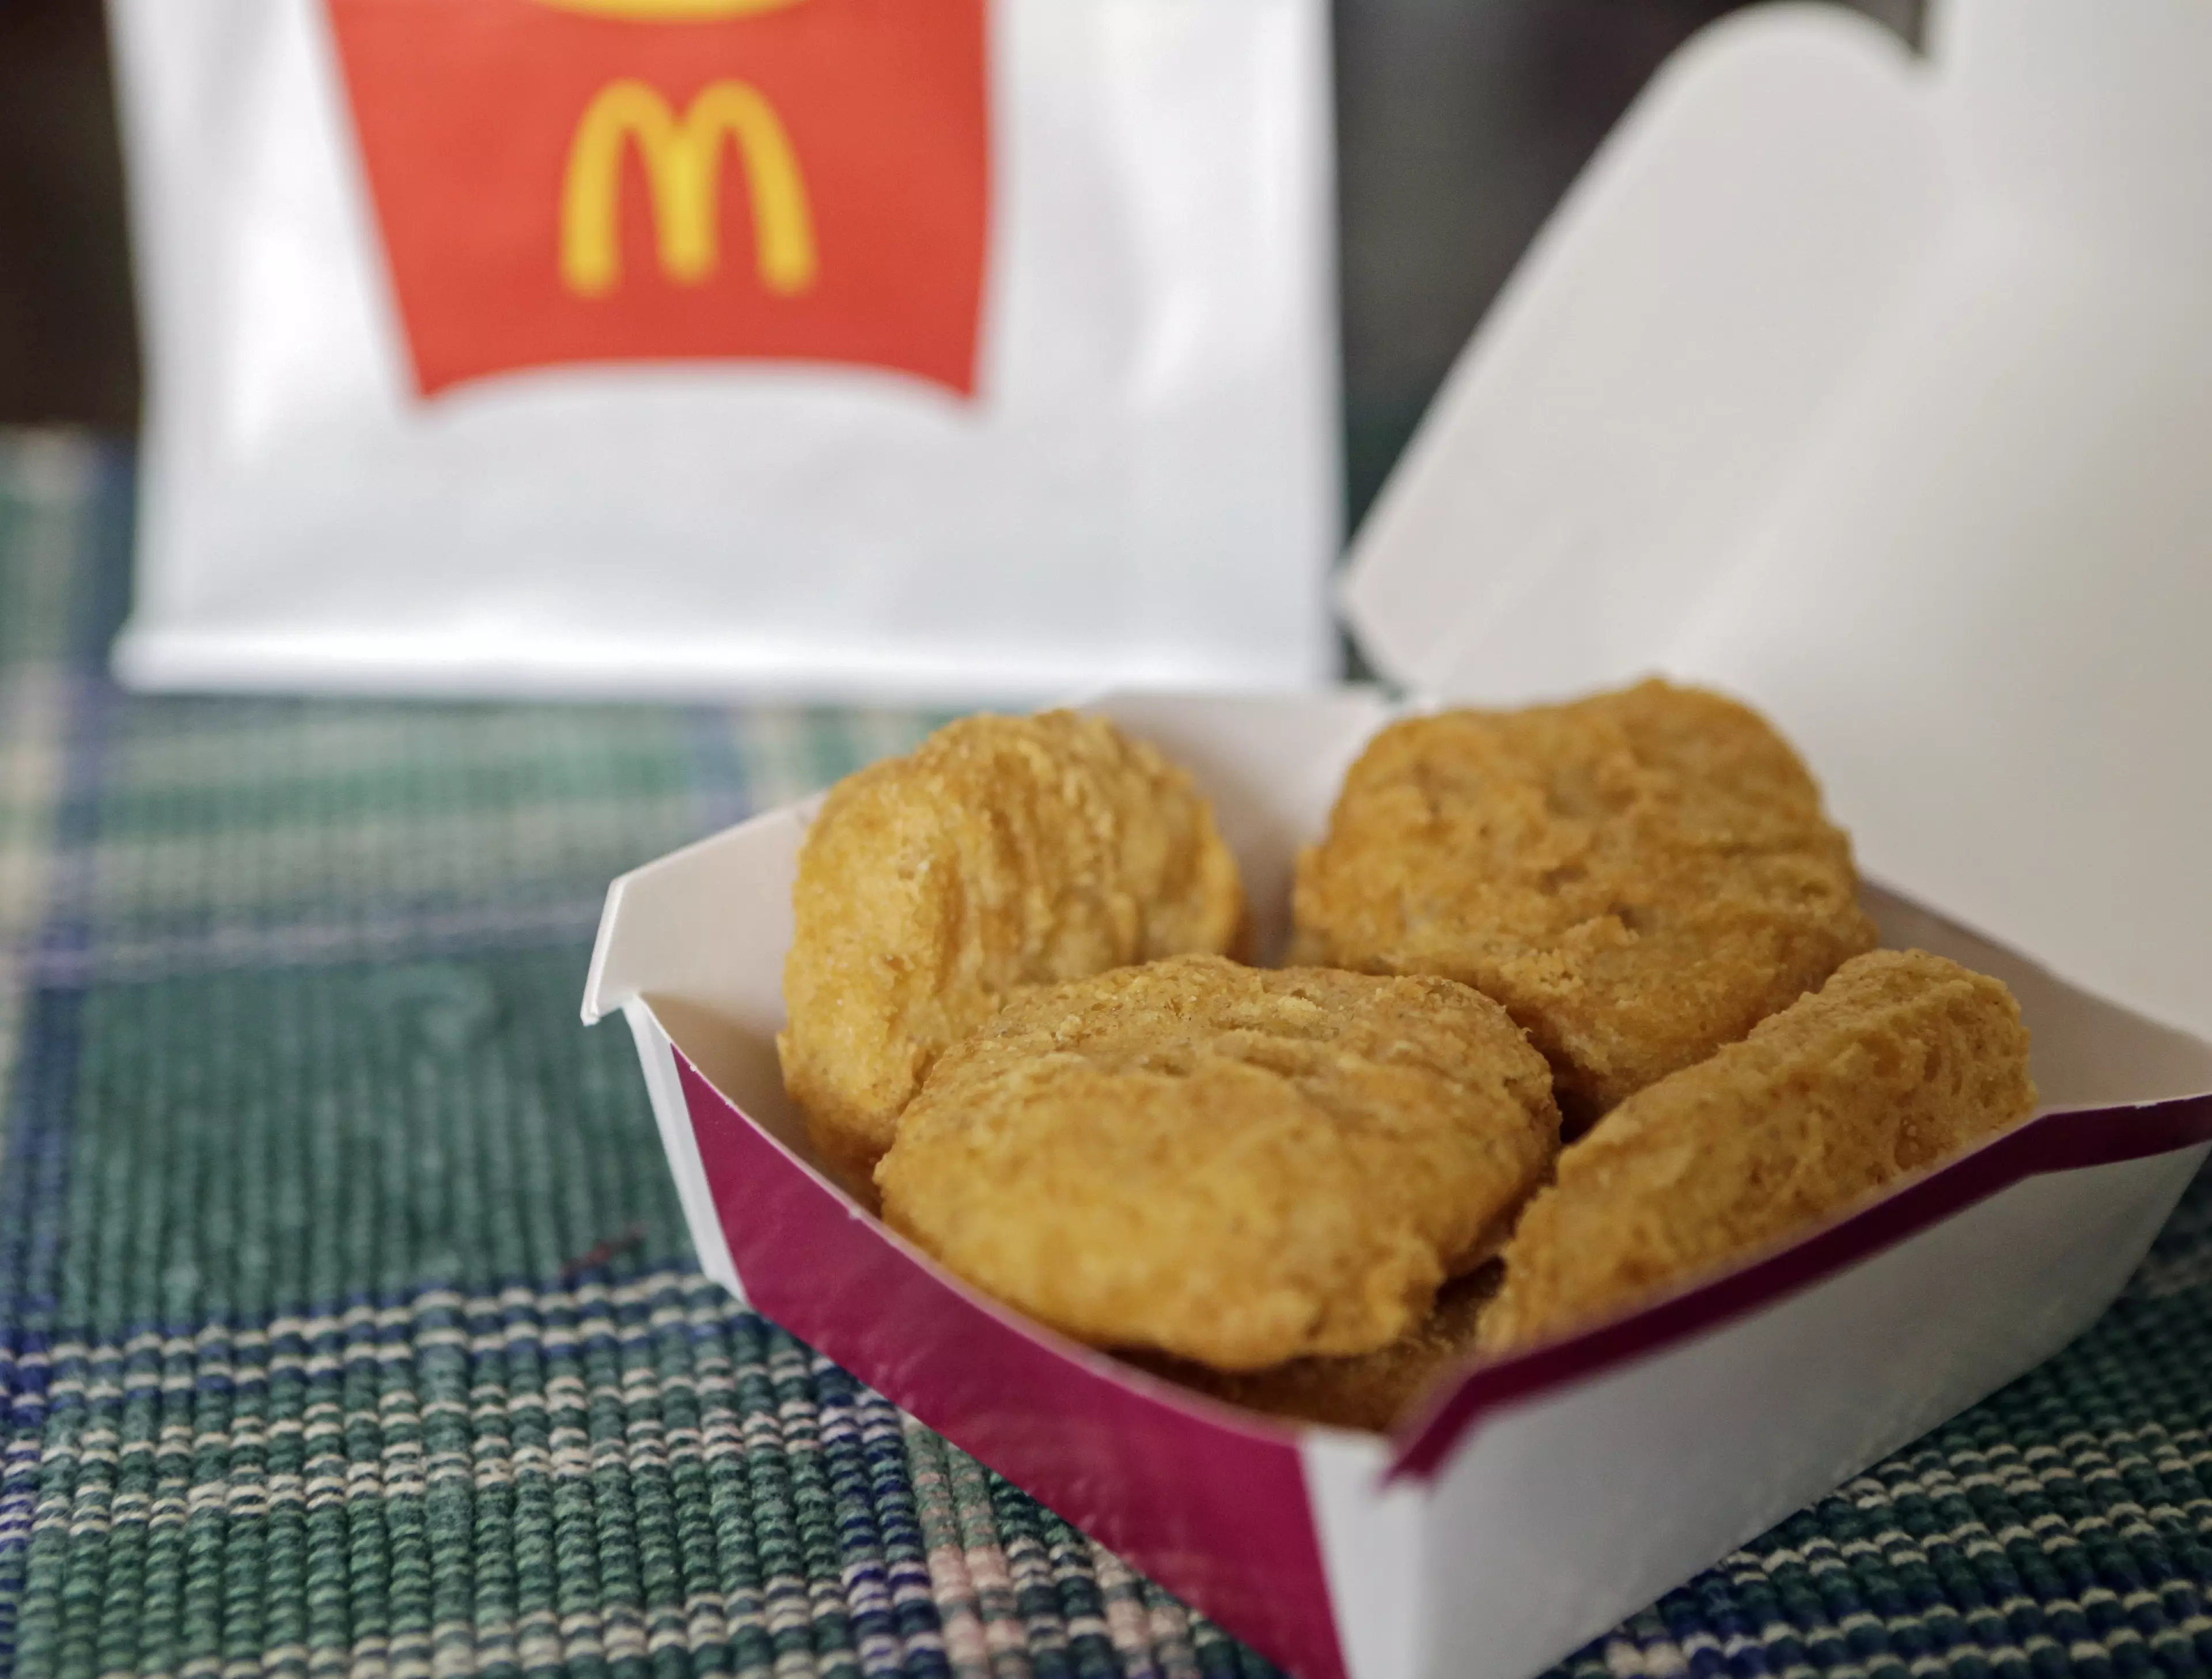 Boy Pulls Gun On Classmate After She Doesn't Give Him A Chicken McNugget